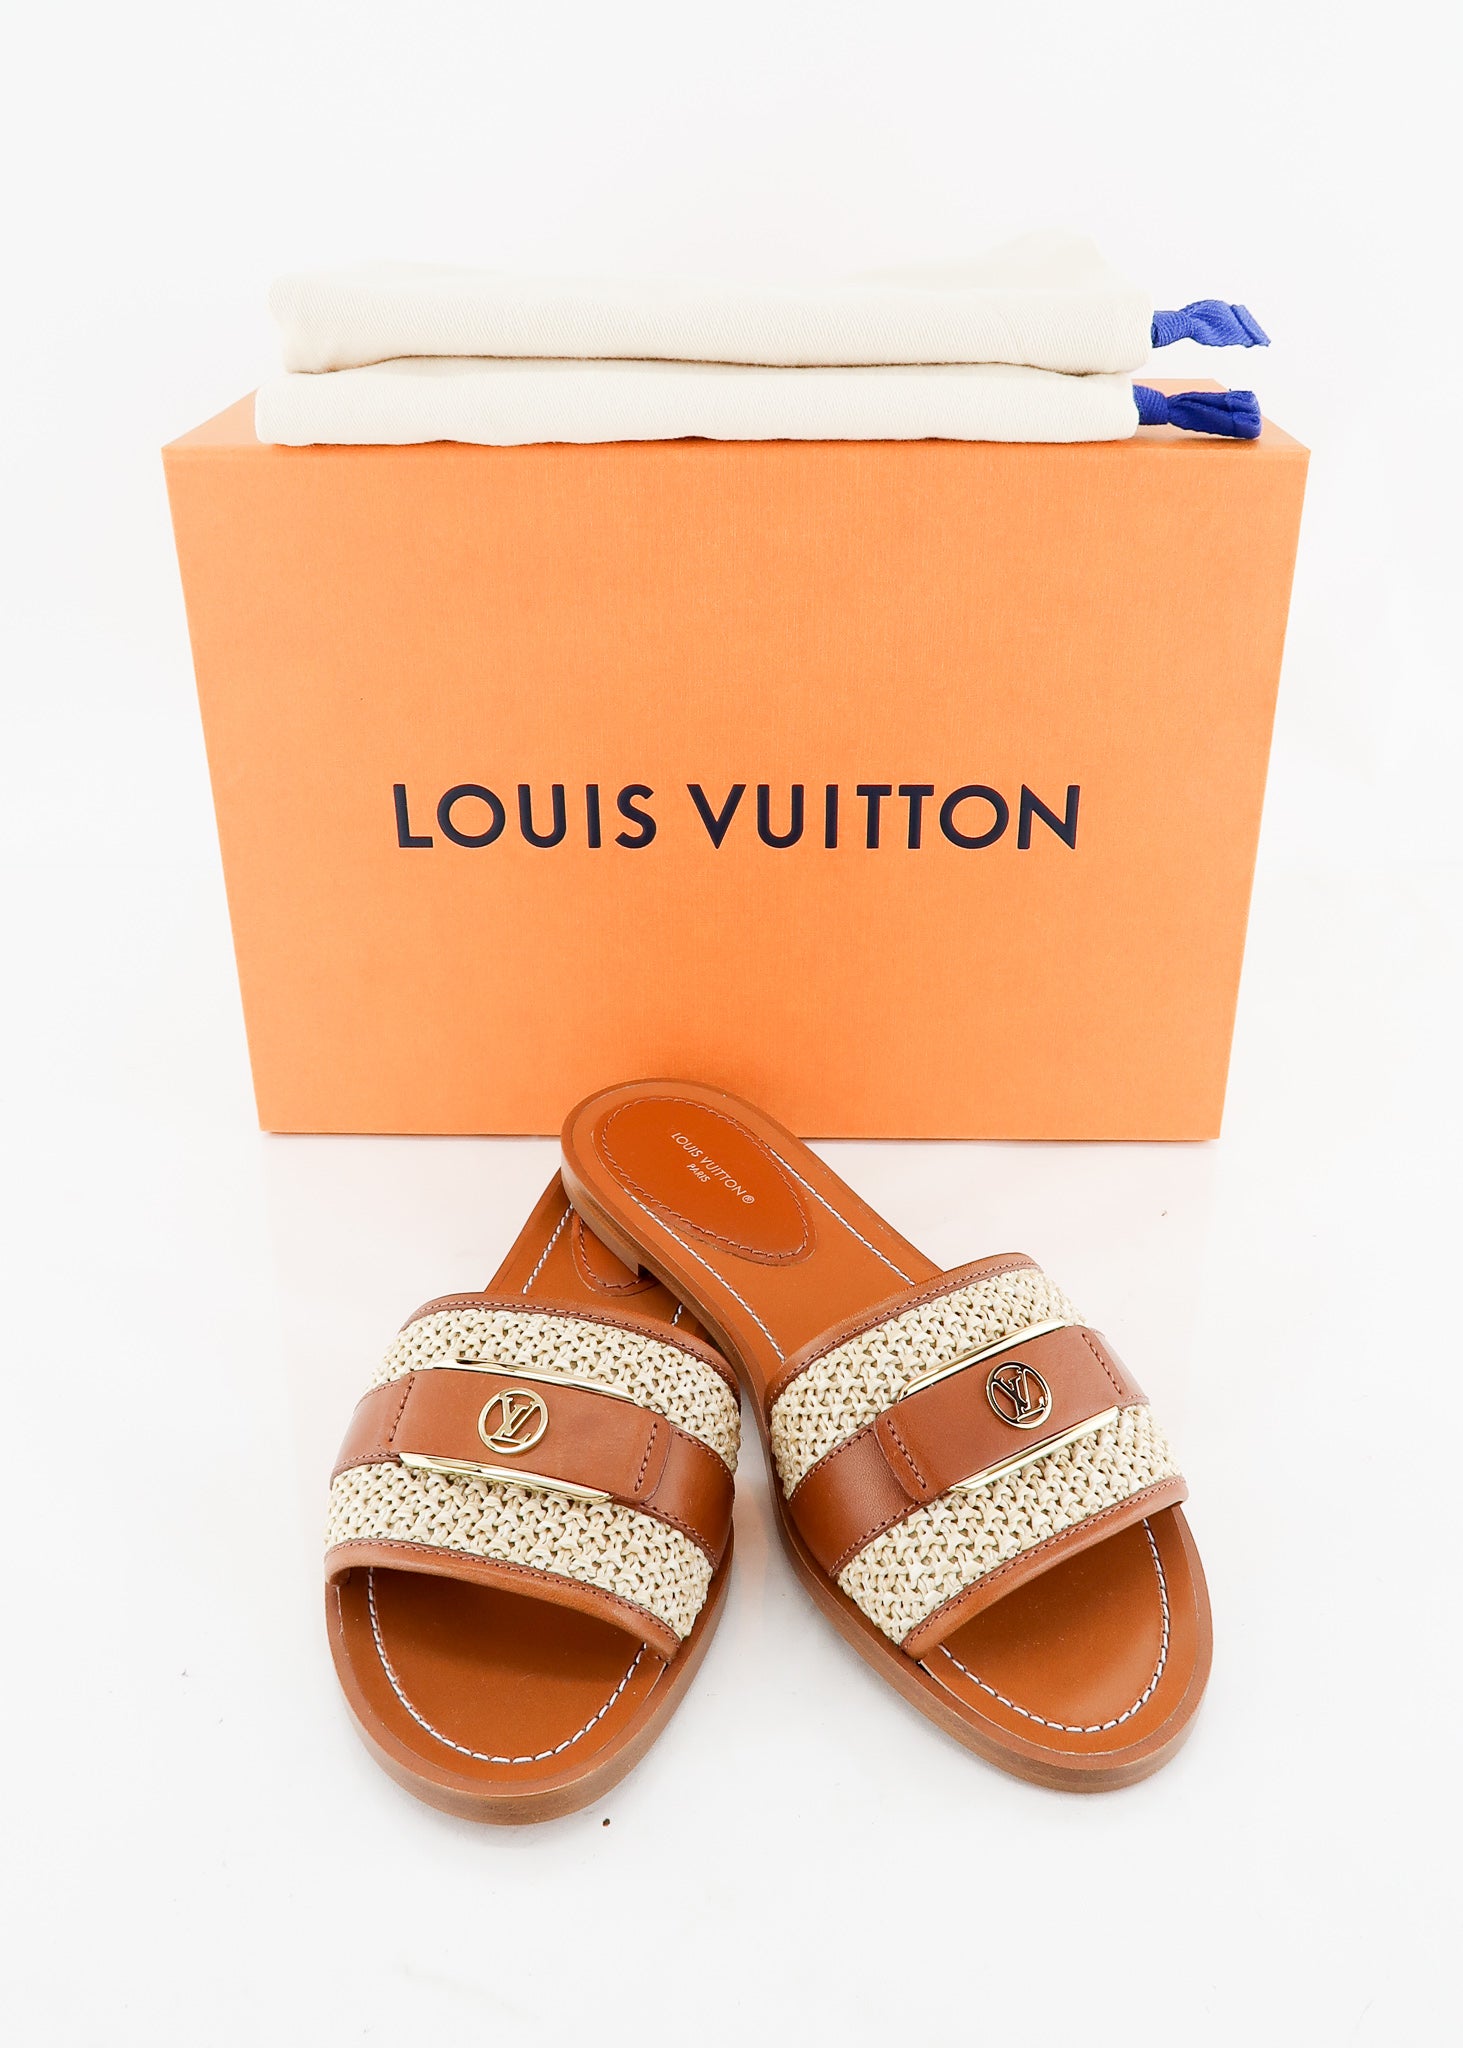 Louis Vuitton - Authenticated Lock It Sandal - Leather Beige for Women, Never Worn